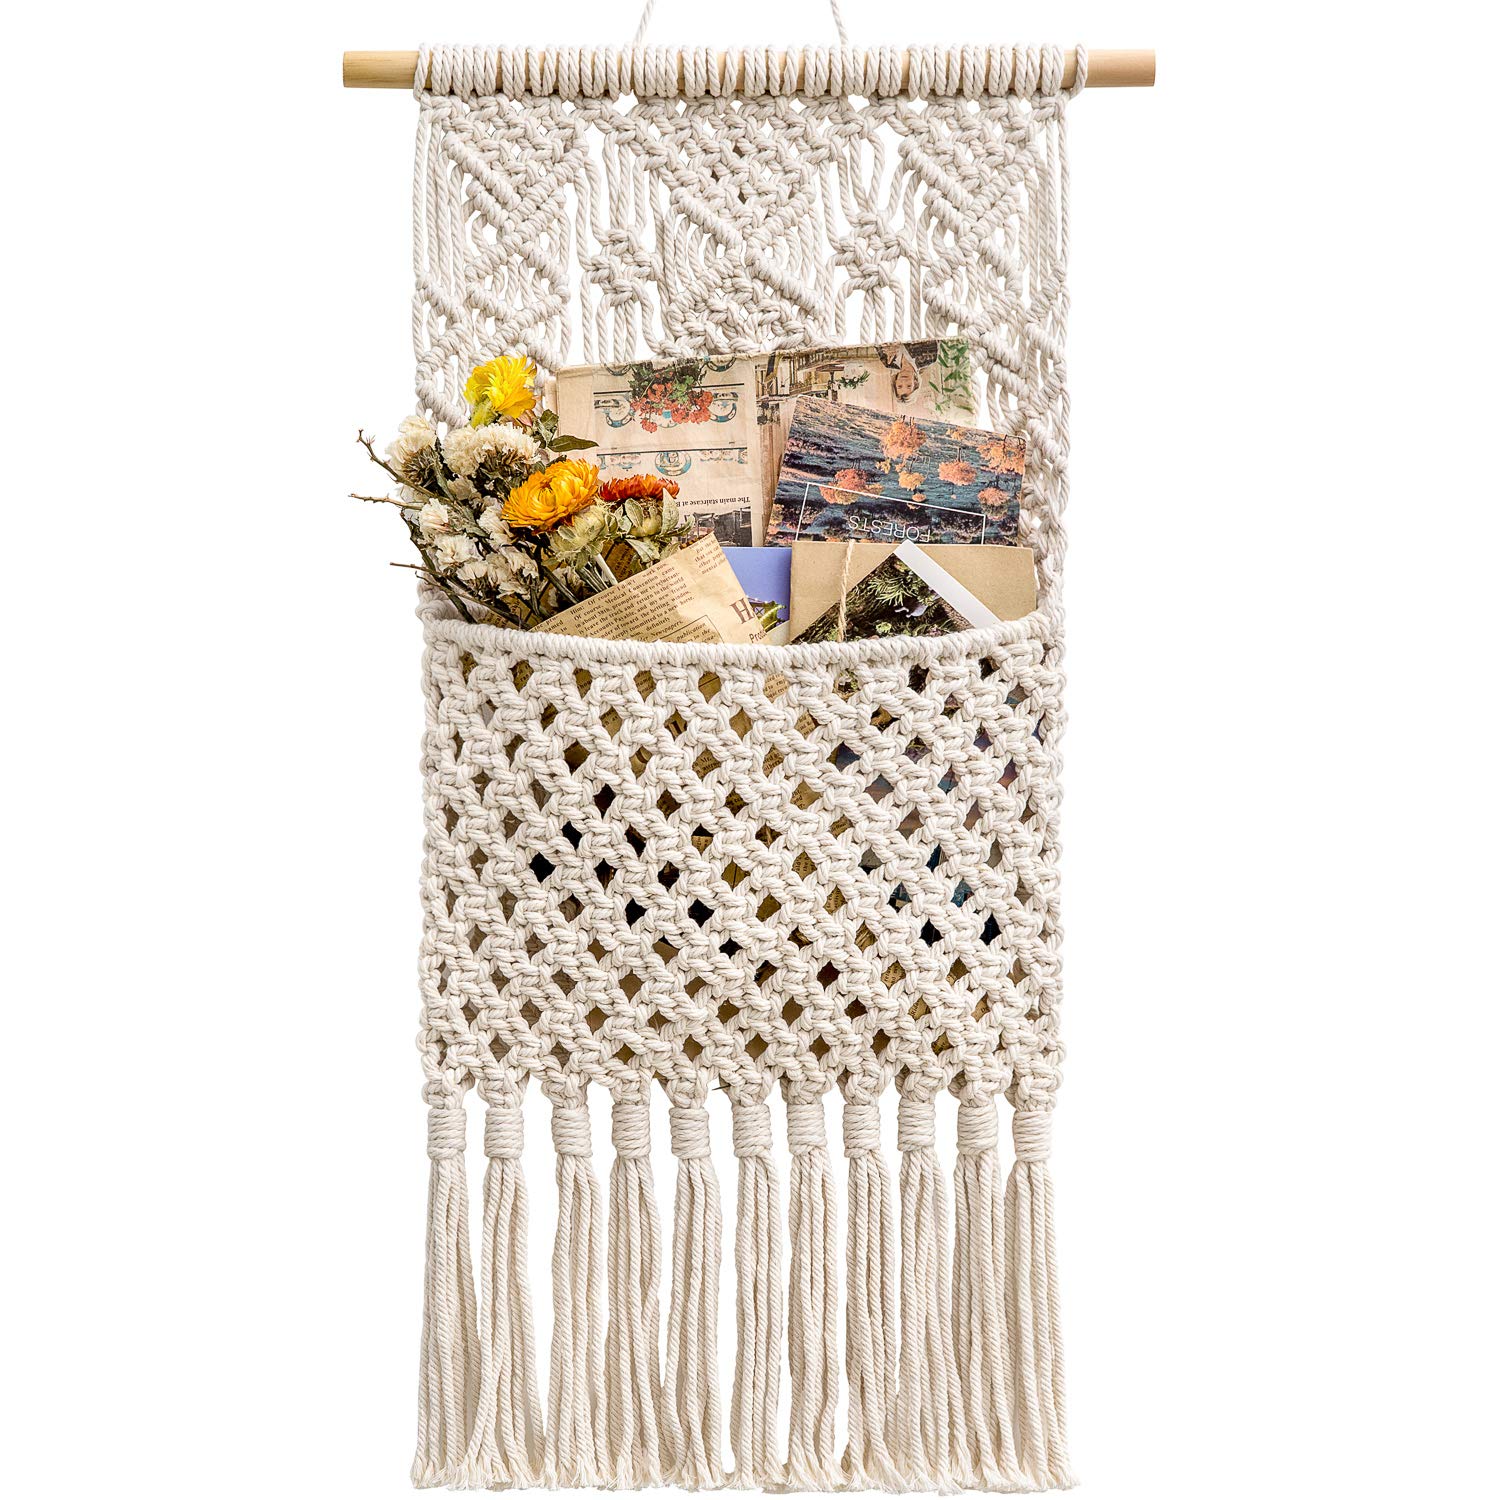 Wall Mount Small Mail Letter Storage Organizing Rack Cotton Hanging Bag Boho Home Decor